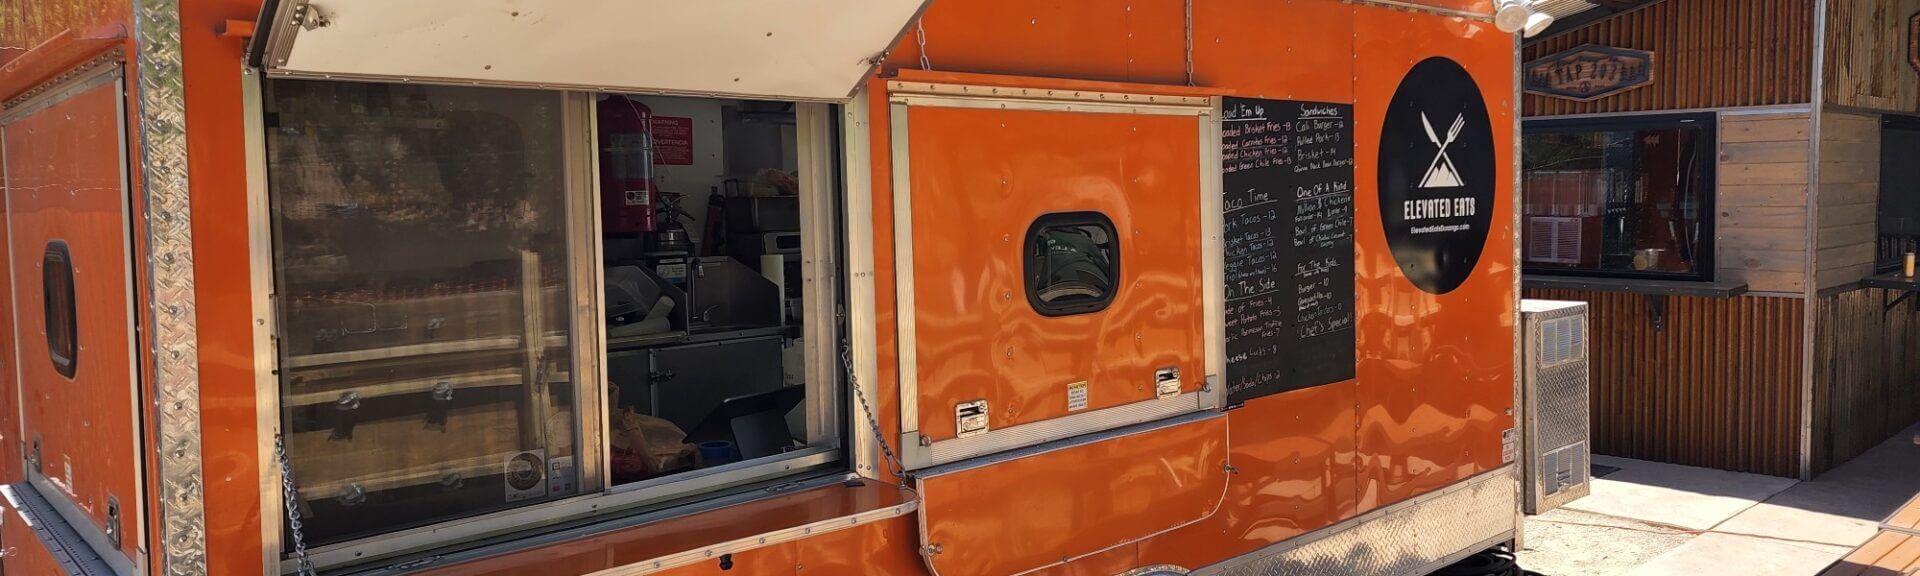 Front of Food Truck